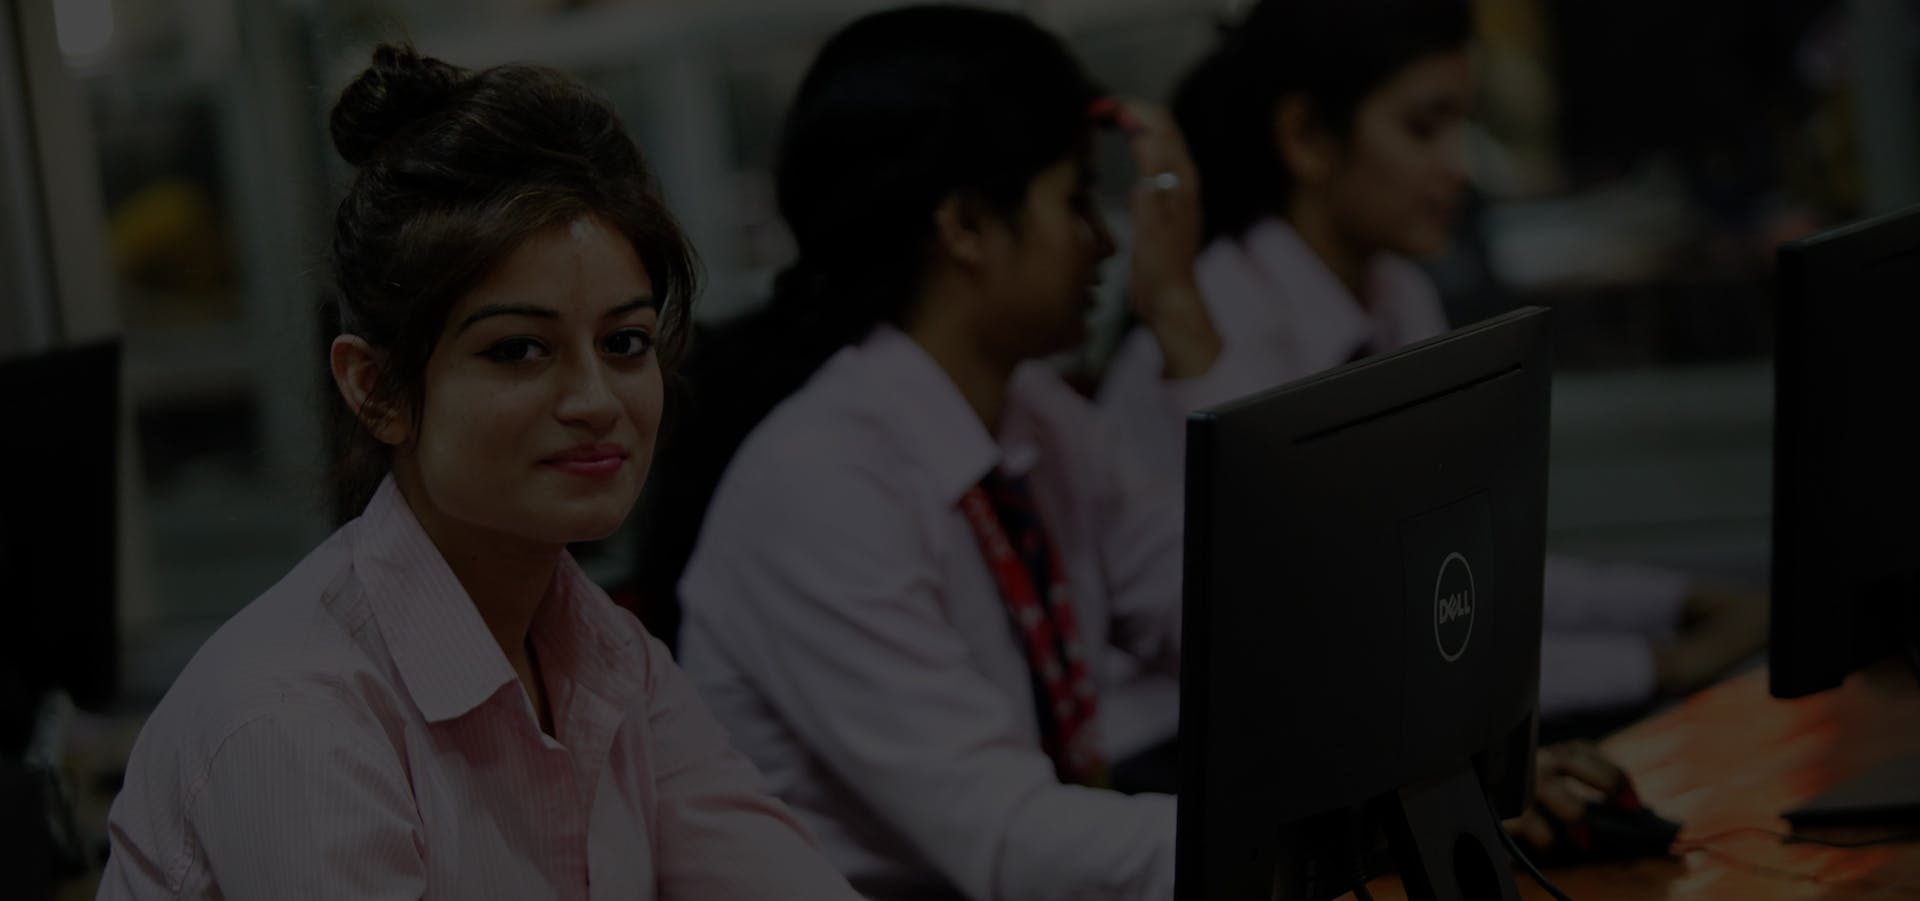 b tech cse best private colleges in india